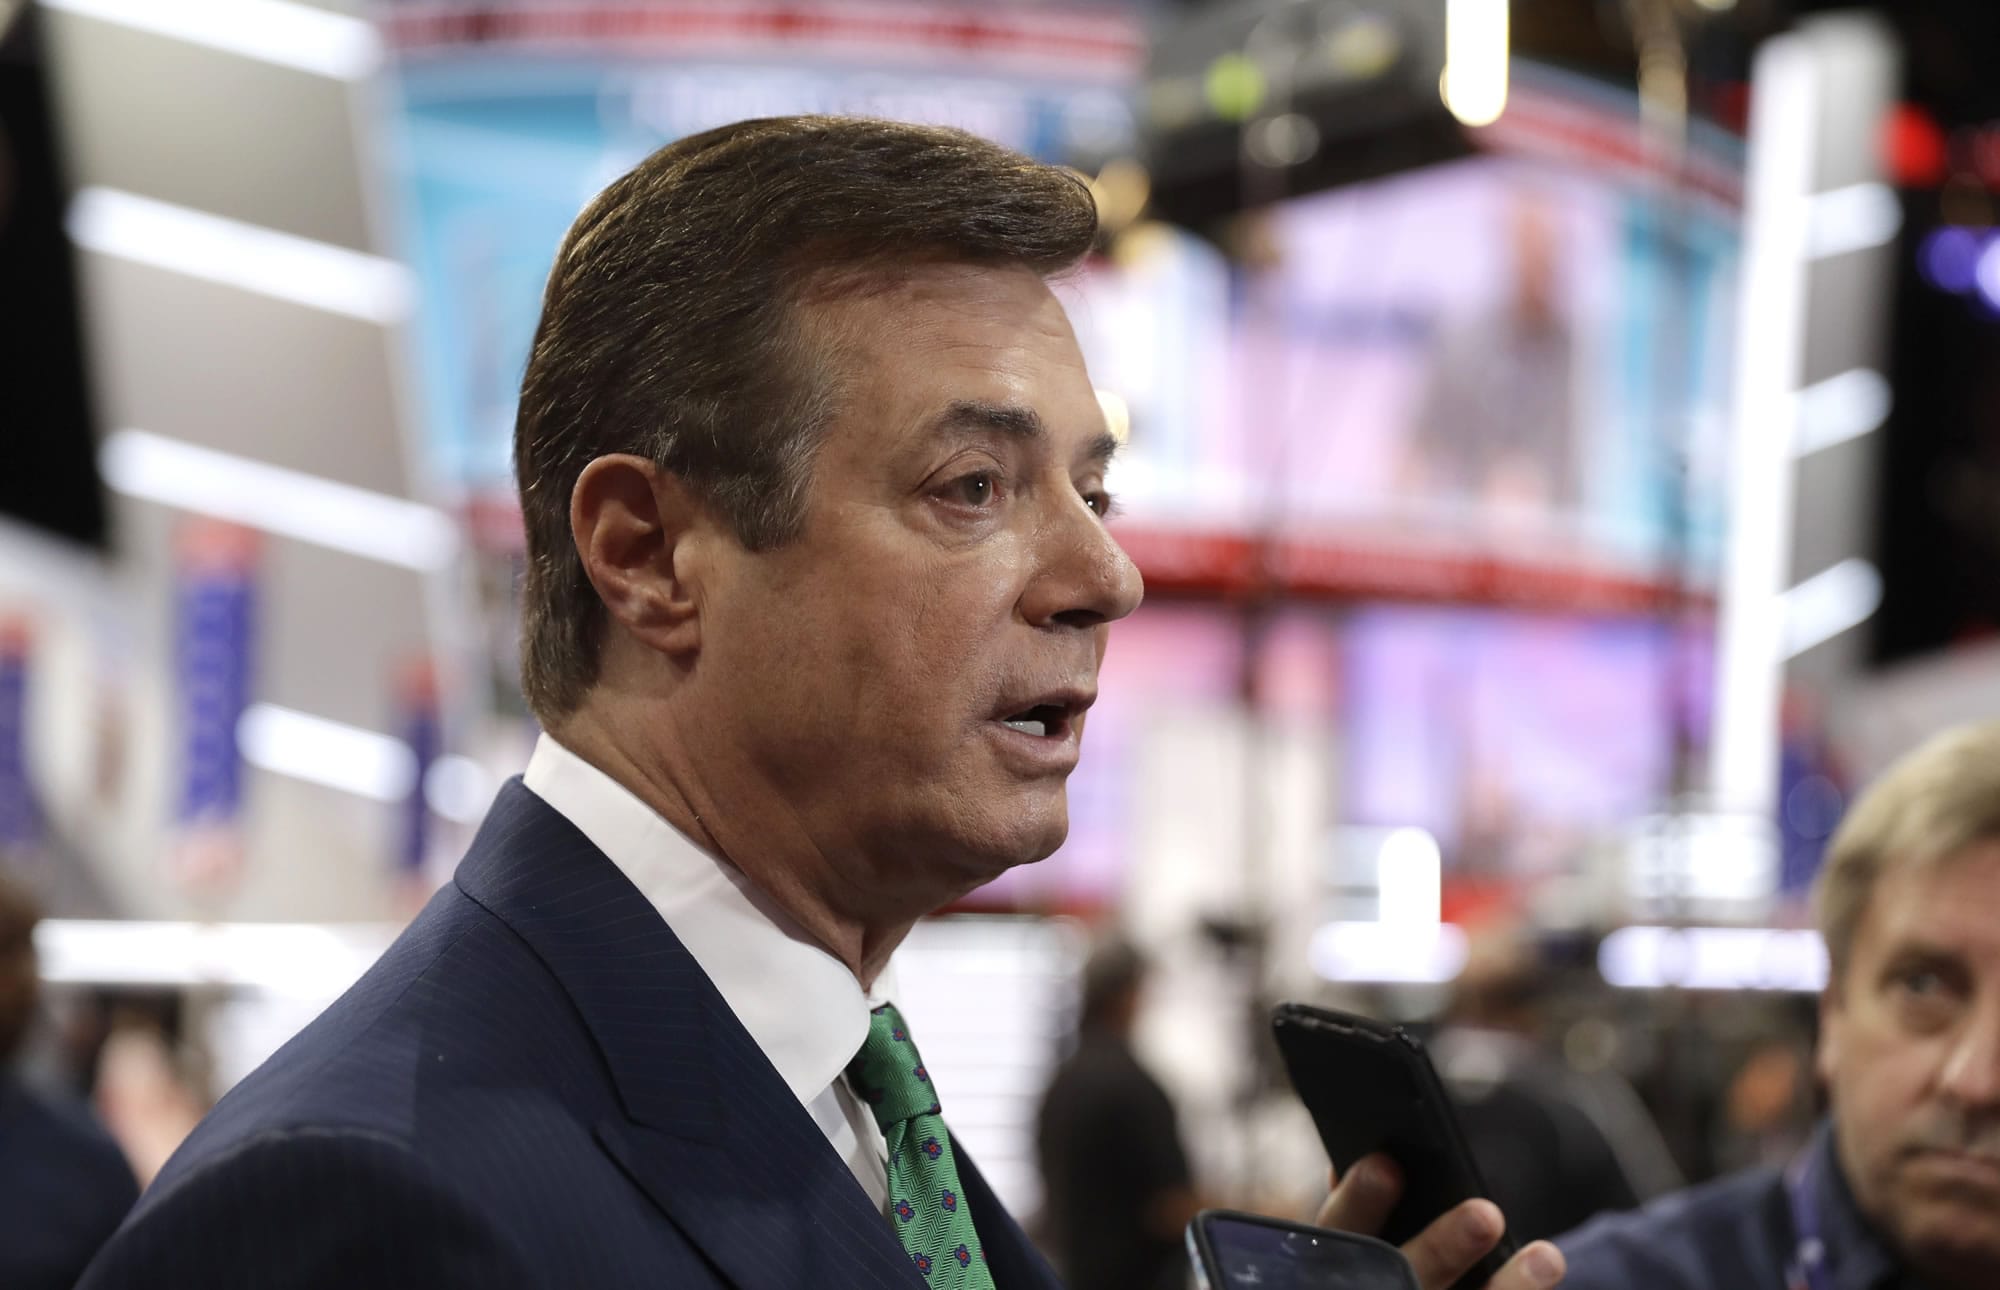 FILE  - In this July 17, 2016, file photo, then-Trump campaign chairman Paul Manafort talks to reporters on the floor of the Republican National Convention in Cleveland. U.S. Treasury Department agents have recently obtained information about offshore financial transactions involving Manafort, as part of a federal anti-corruption probe into his work in Eastern Europe, The Associated Press has learned.